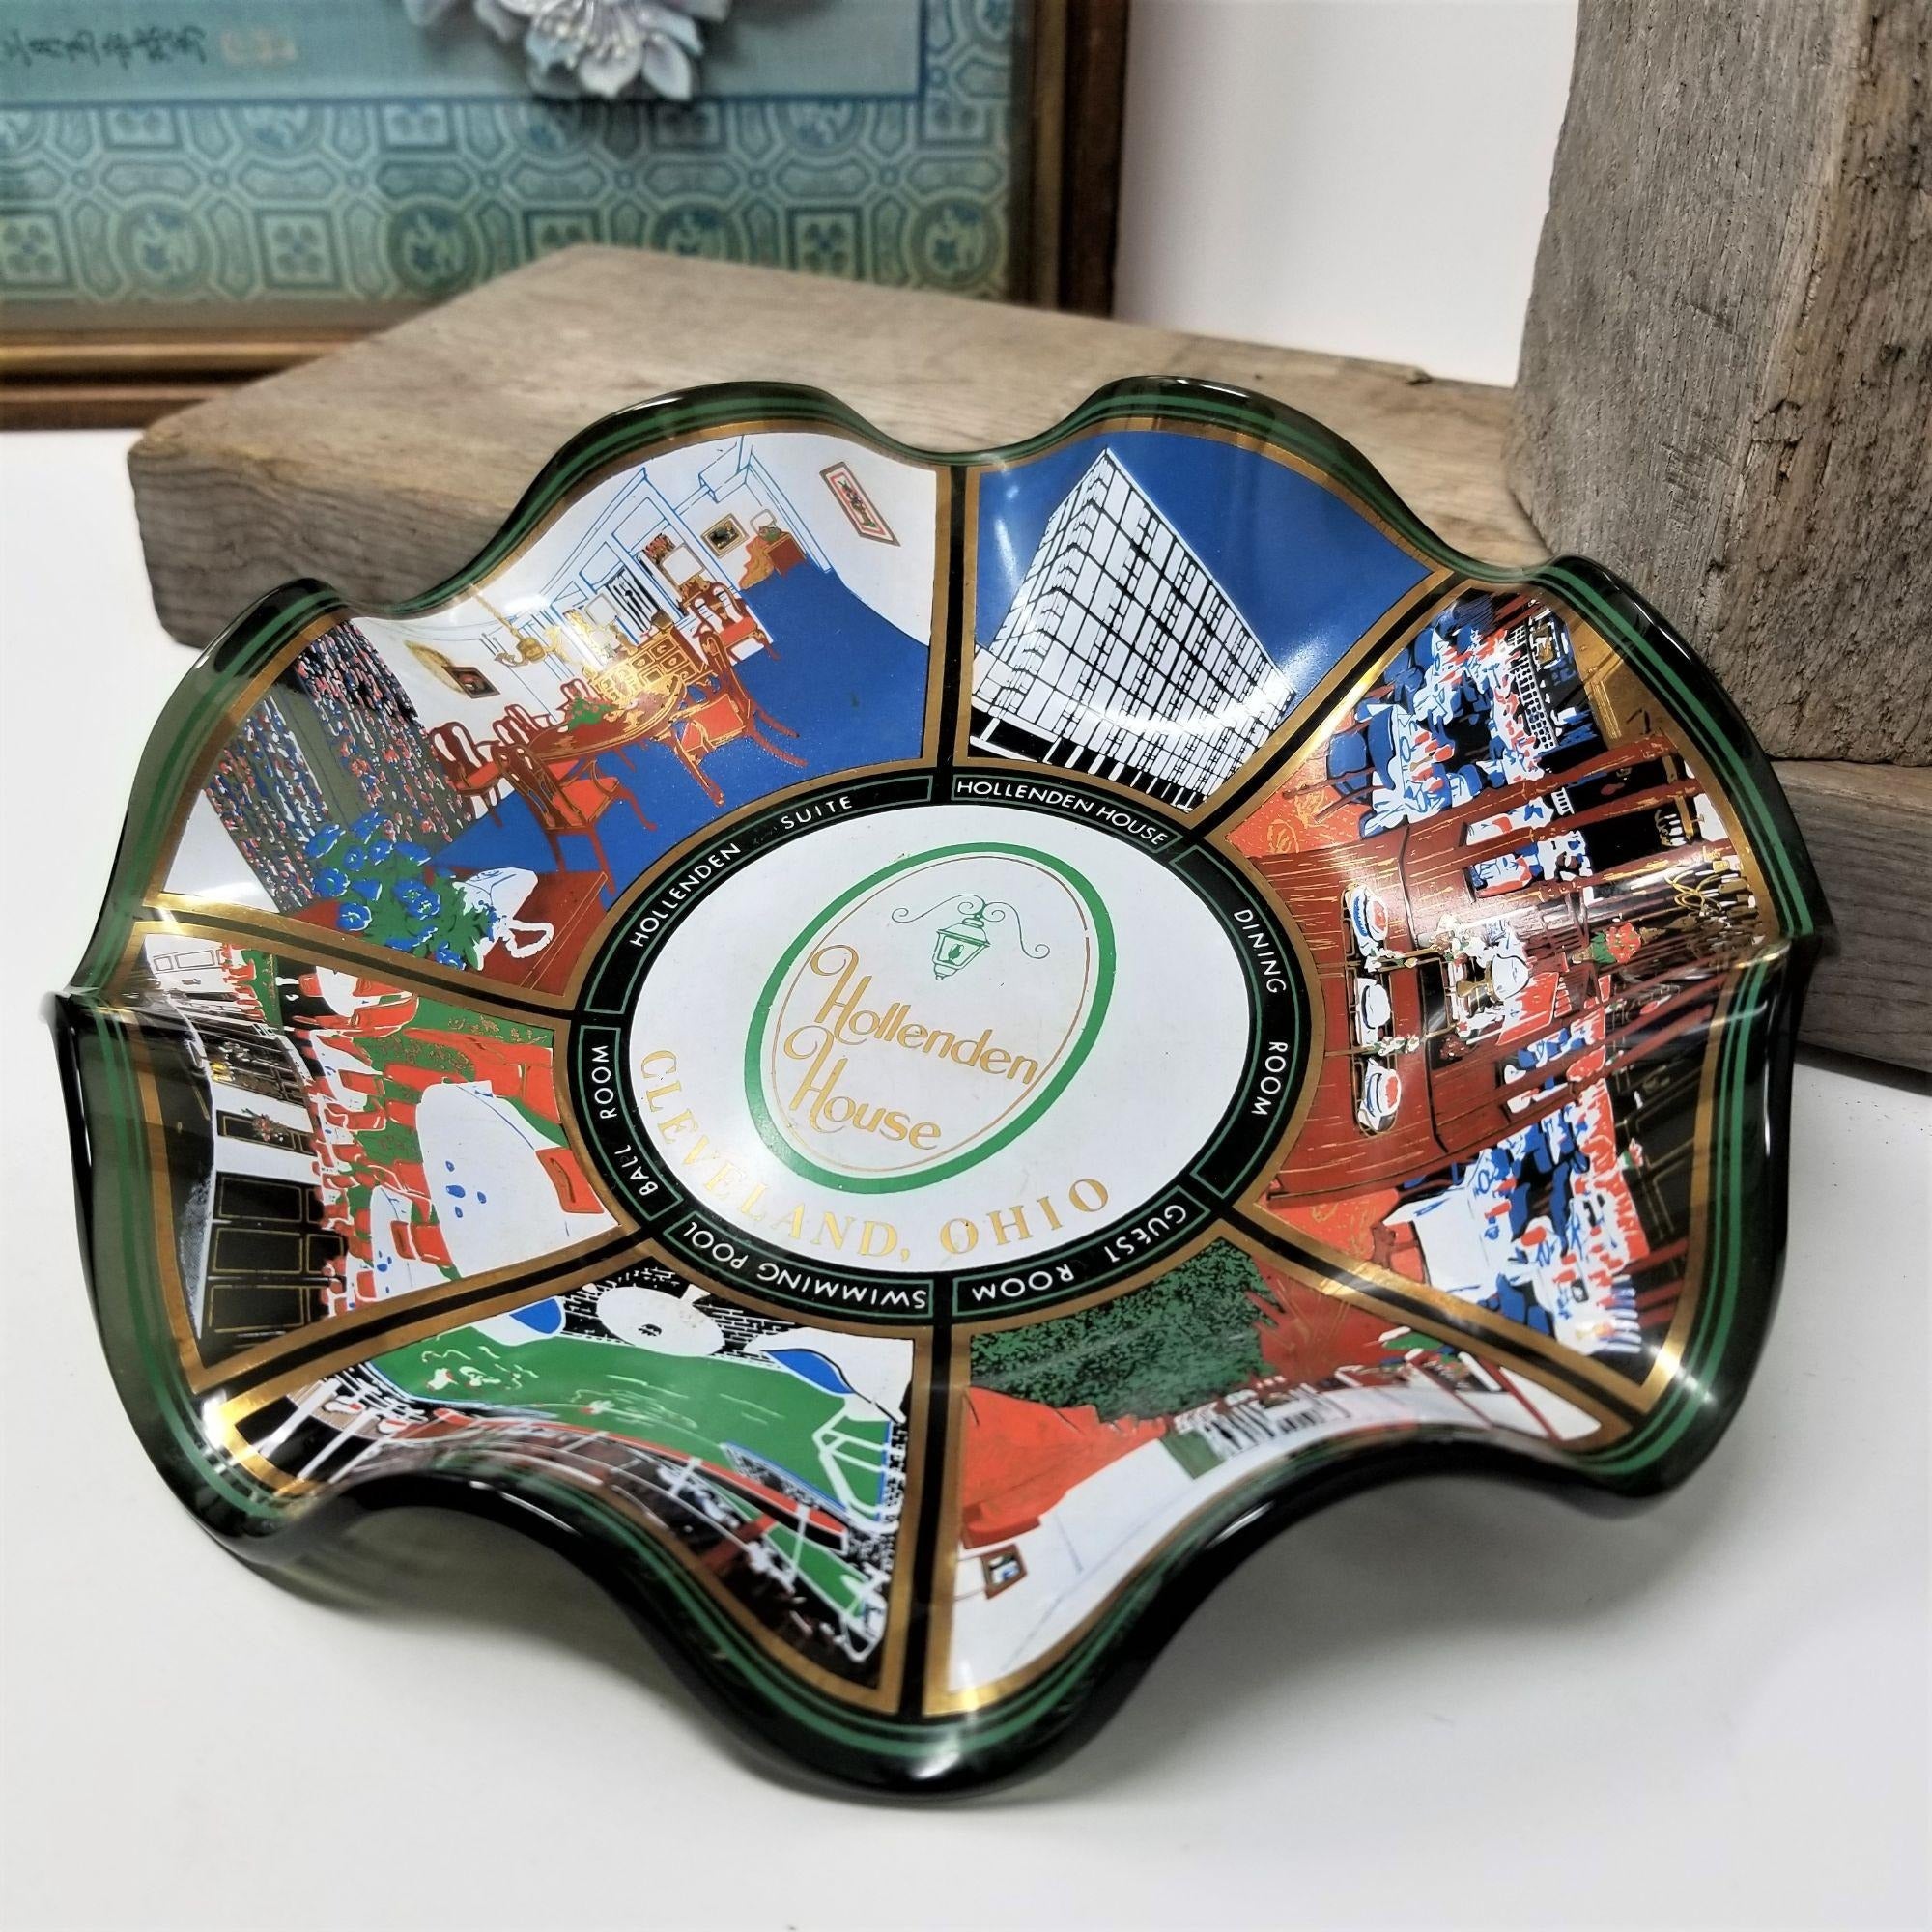 1960-70S CLEVELAND,OHIO HOLLENDEN HOUSE HOTEL SMOKED GLASS ASHTRAY/CANDY DISH